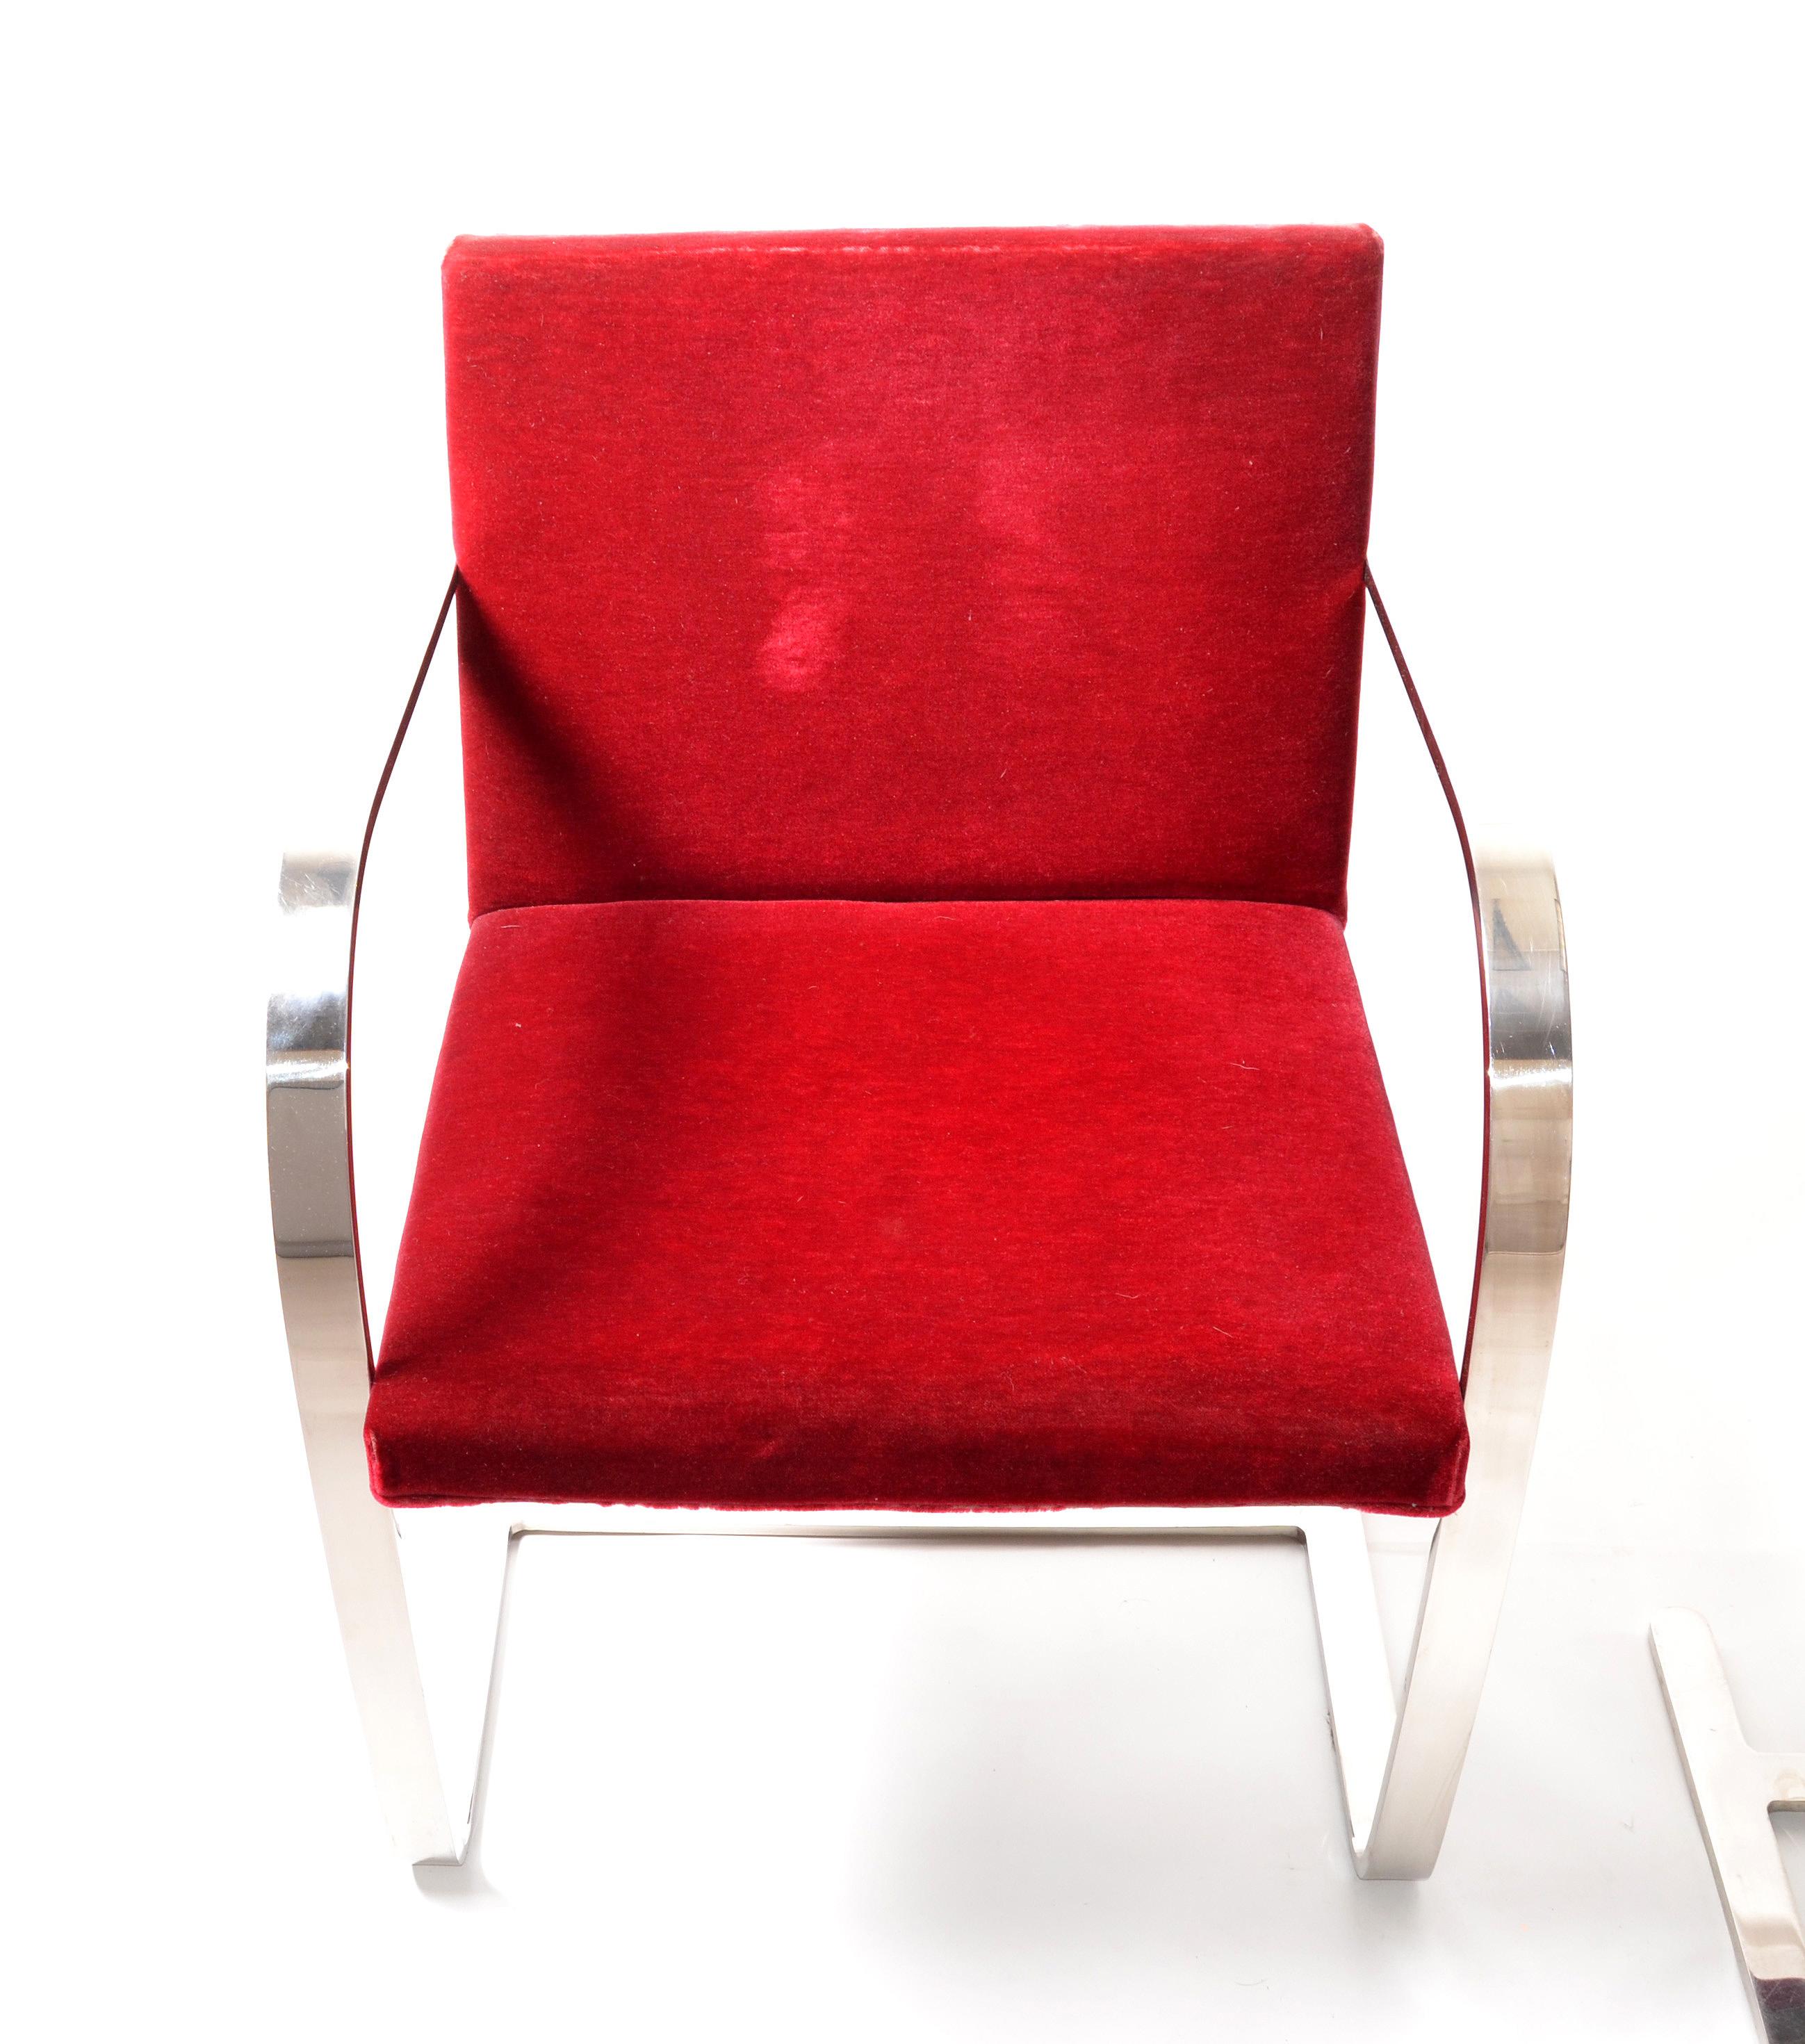 Mies Van Der Rohe for Knoll Stainless Steel Brno Chairs Red Velvet 1979, Pair In Good Condition For Sale In Miami, FL